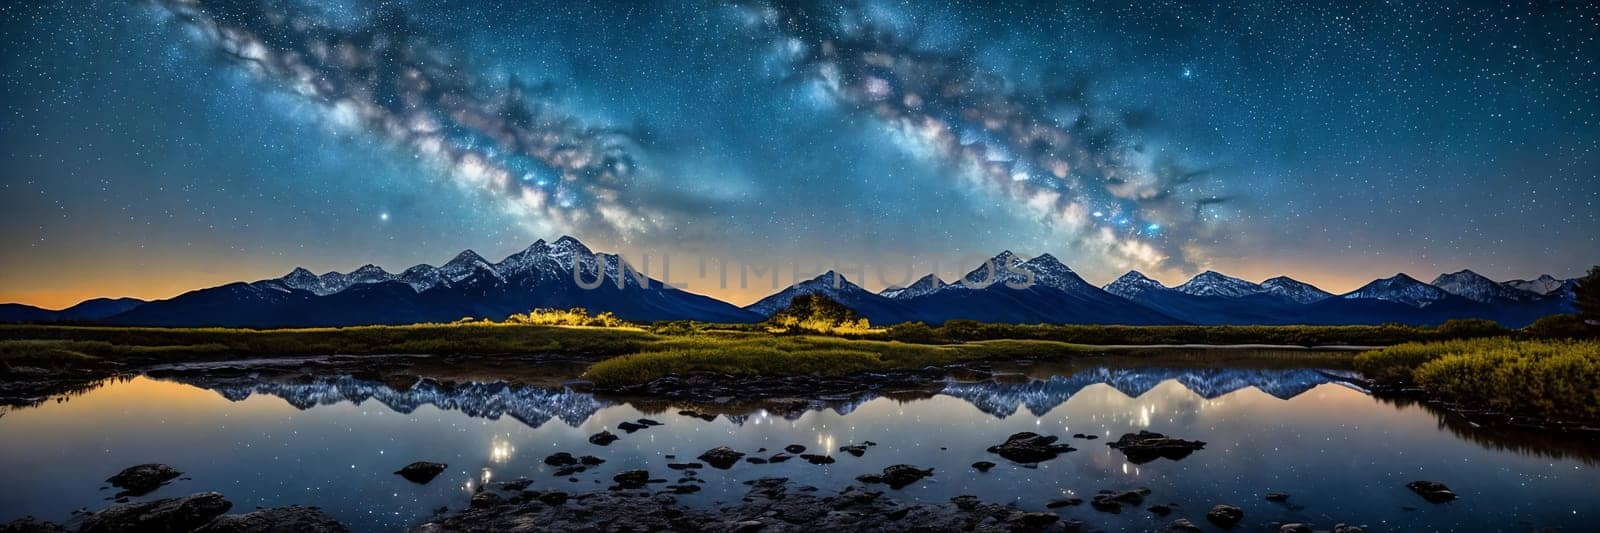 Marvel of a starry night sky in a remote location, with a silhouette of a distant mountain range adding depth to the image